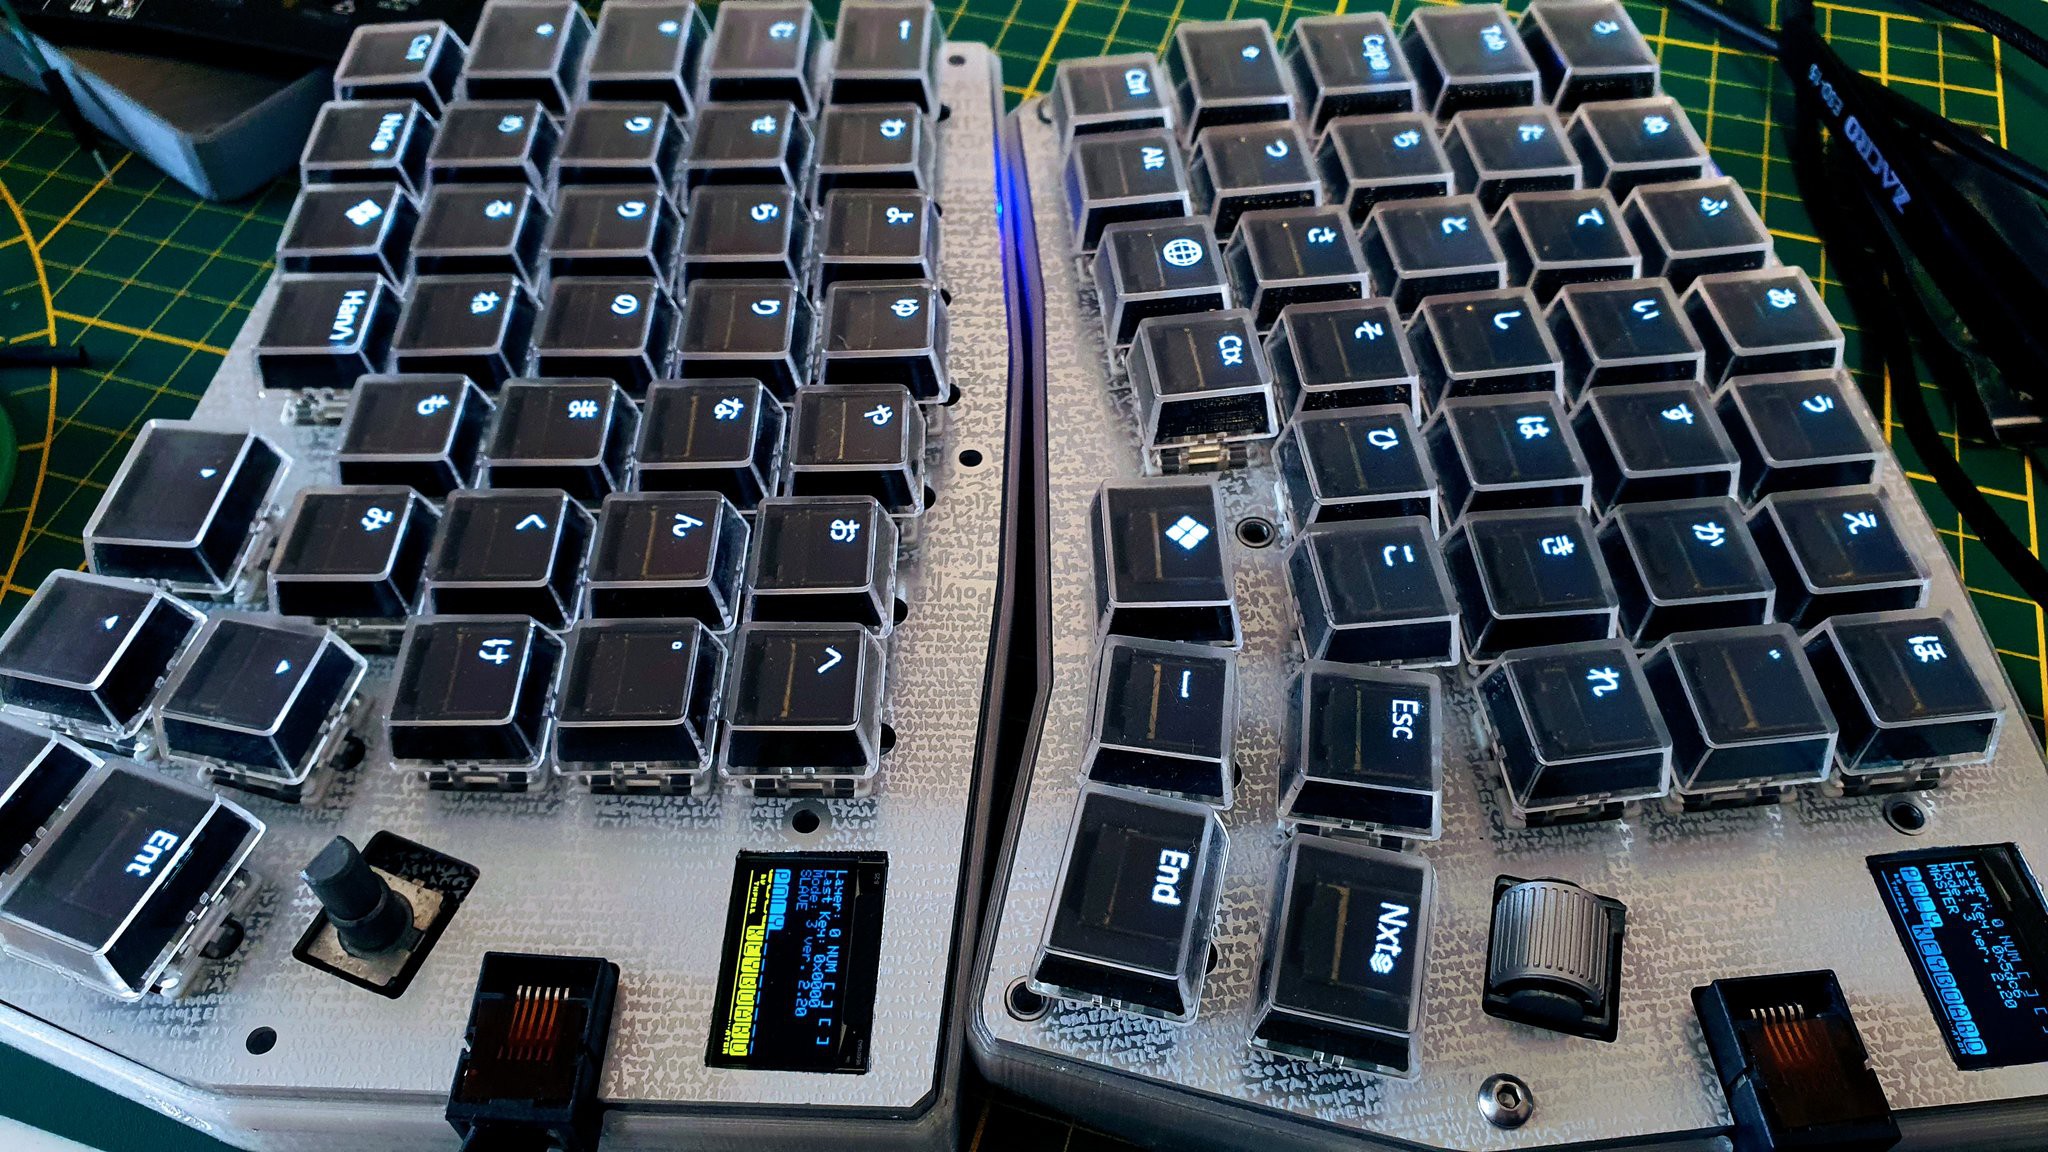 PolyKybd, a split keyboard with OLED screens in the keycaps.